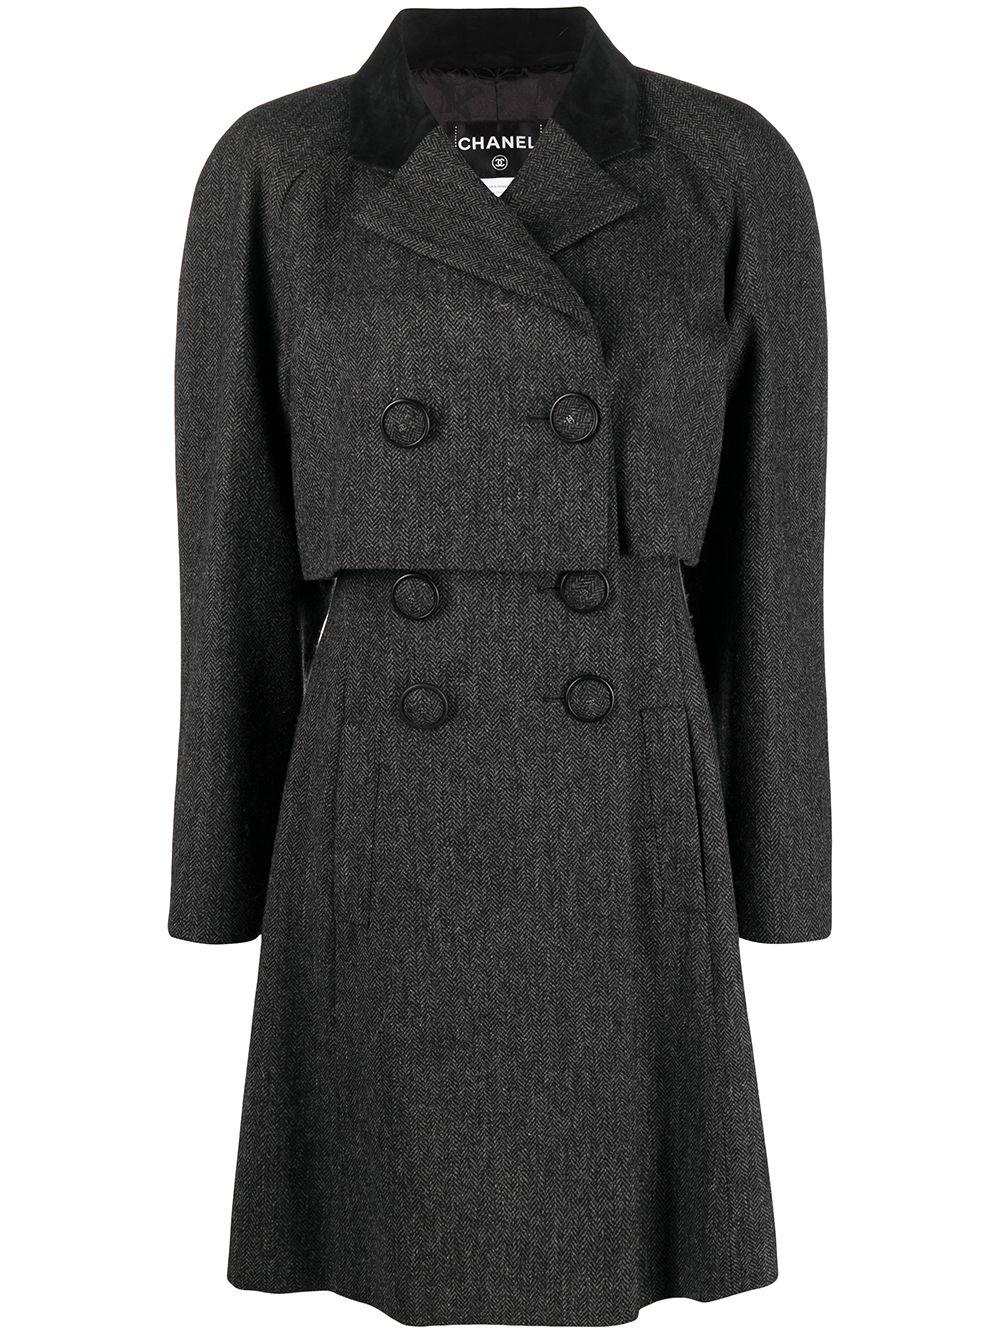 Chanel grey wool coat featuring a chevron pattern, a false cape, double-breasted front fastening, a black leather suede top part collar, logo buttons, a silk iconic lining.
Estimated size 40fr/US8/UK12
Composition: 100% Wool  
In good vintage